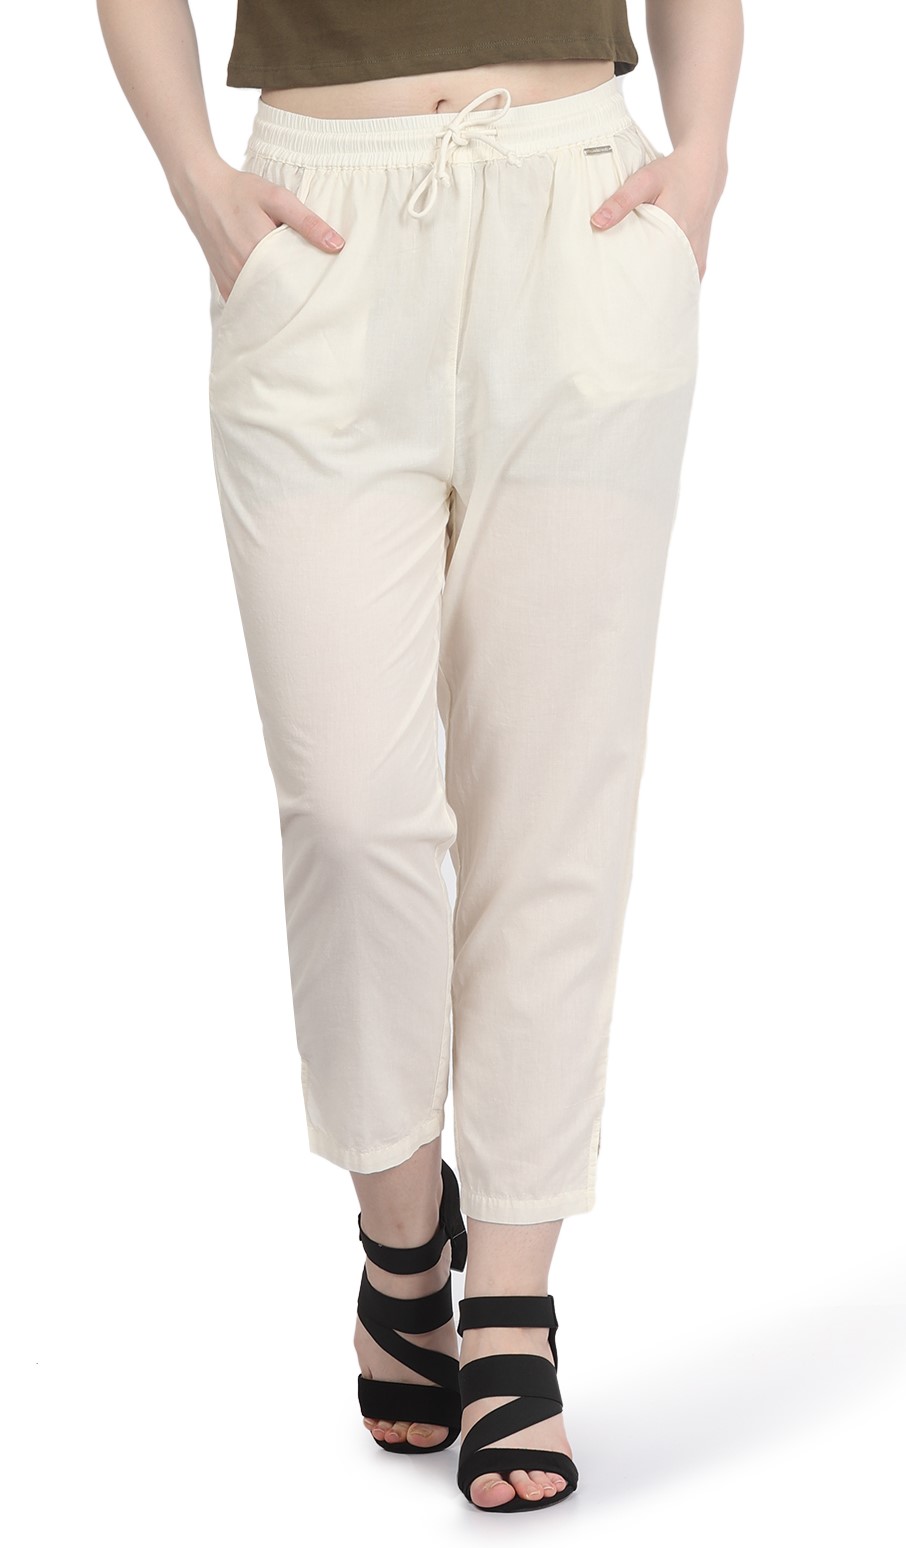 Frenchtrendz Women's cotton pant Elastic closure with drawstring